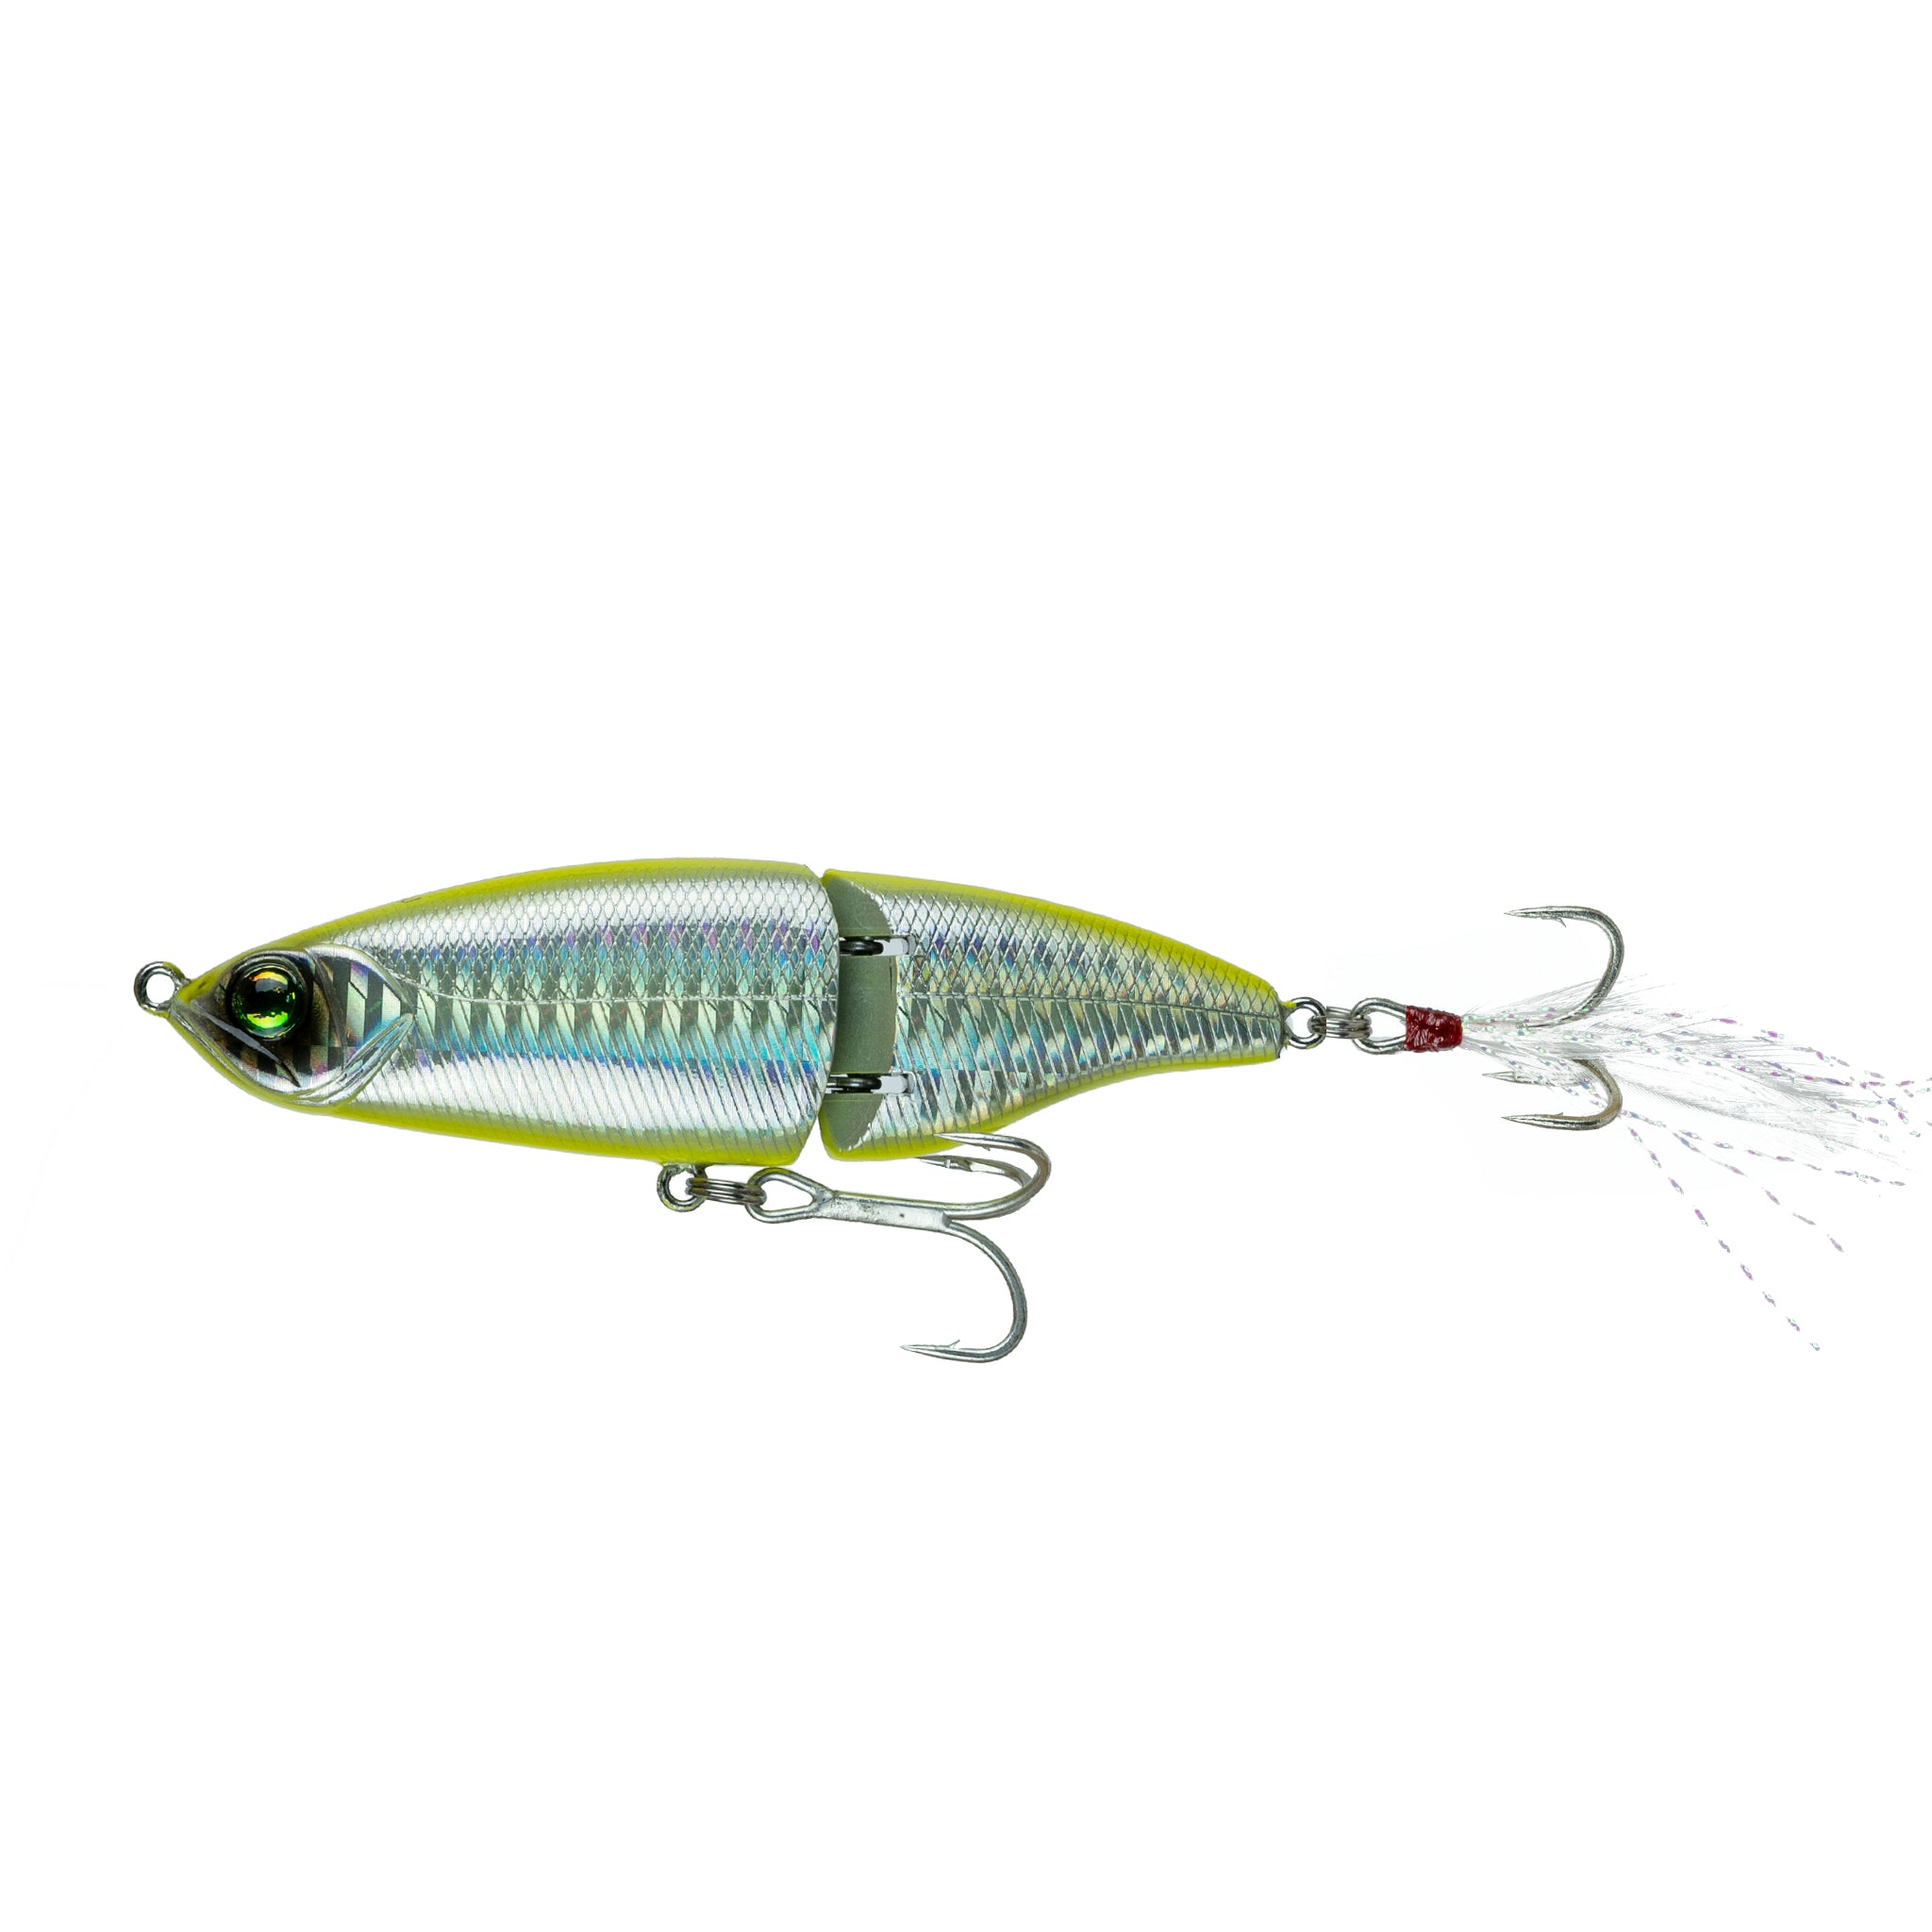 6th Sense Speed Glide 100 Saltwater Swimbait, Dirty Chartreuse